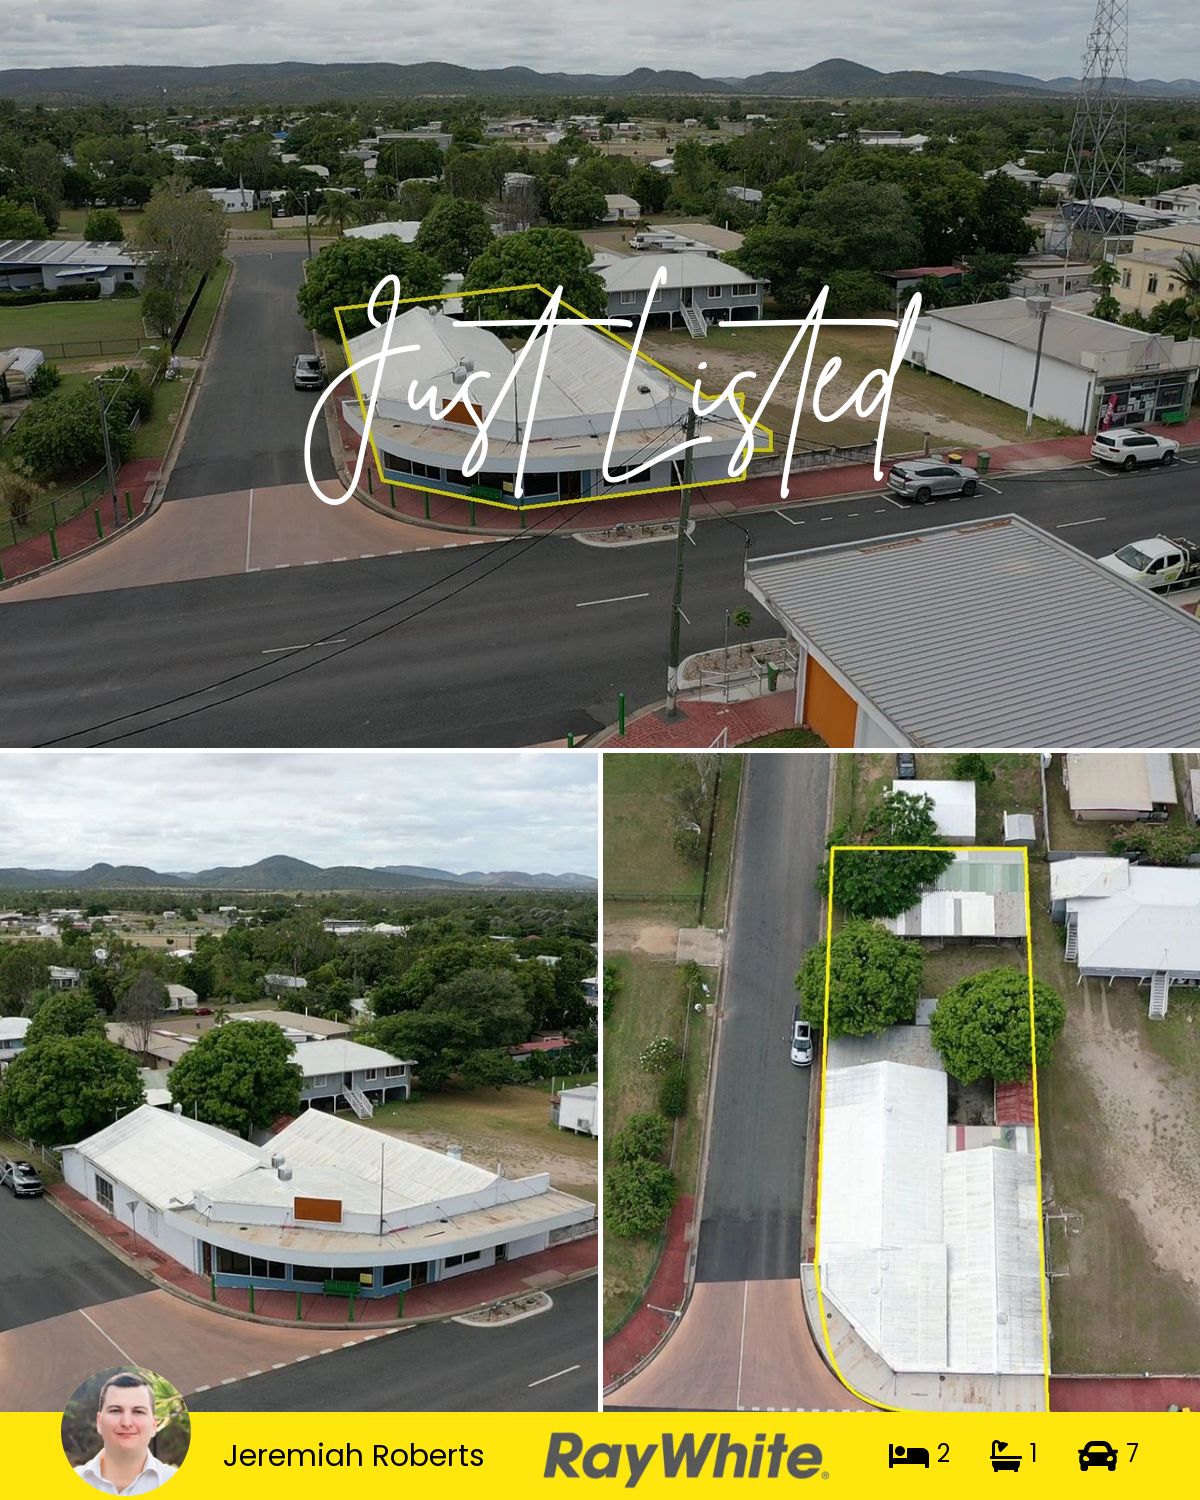 24-26 Stanley Street, Collinsville, QLD 4804 | Realty.com.au